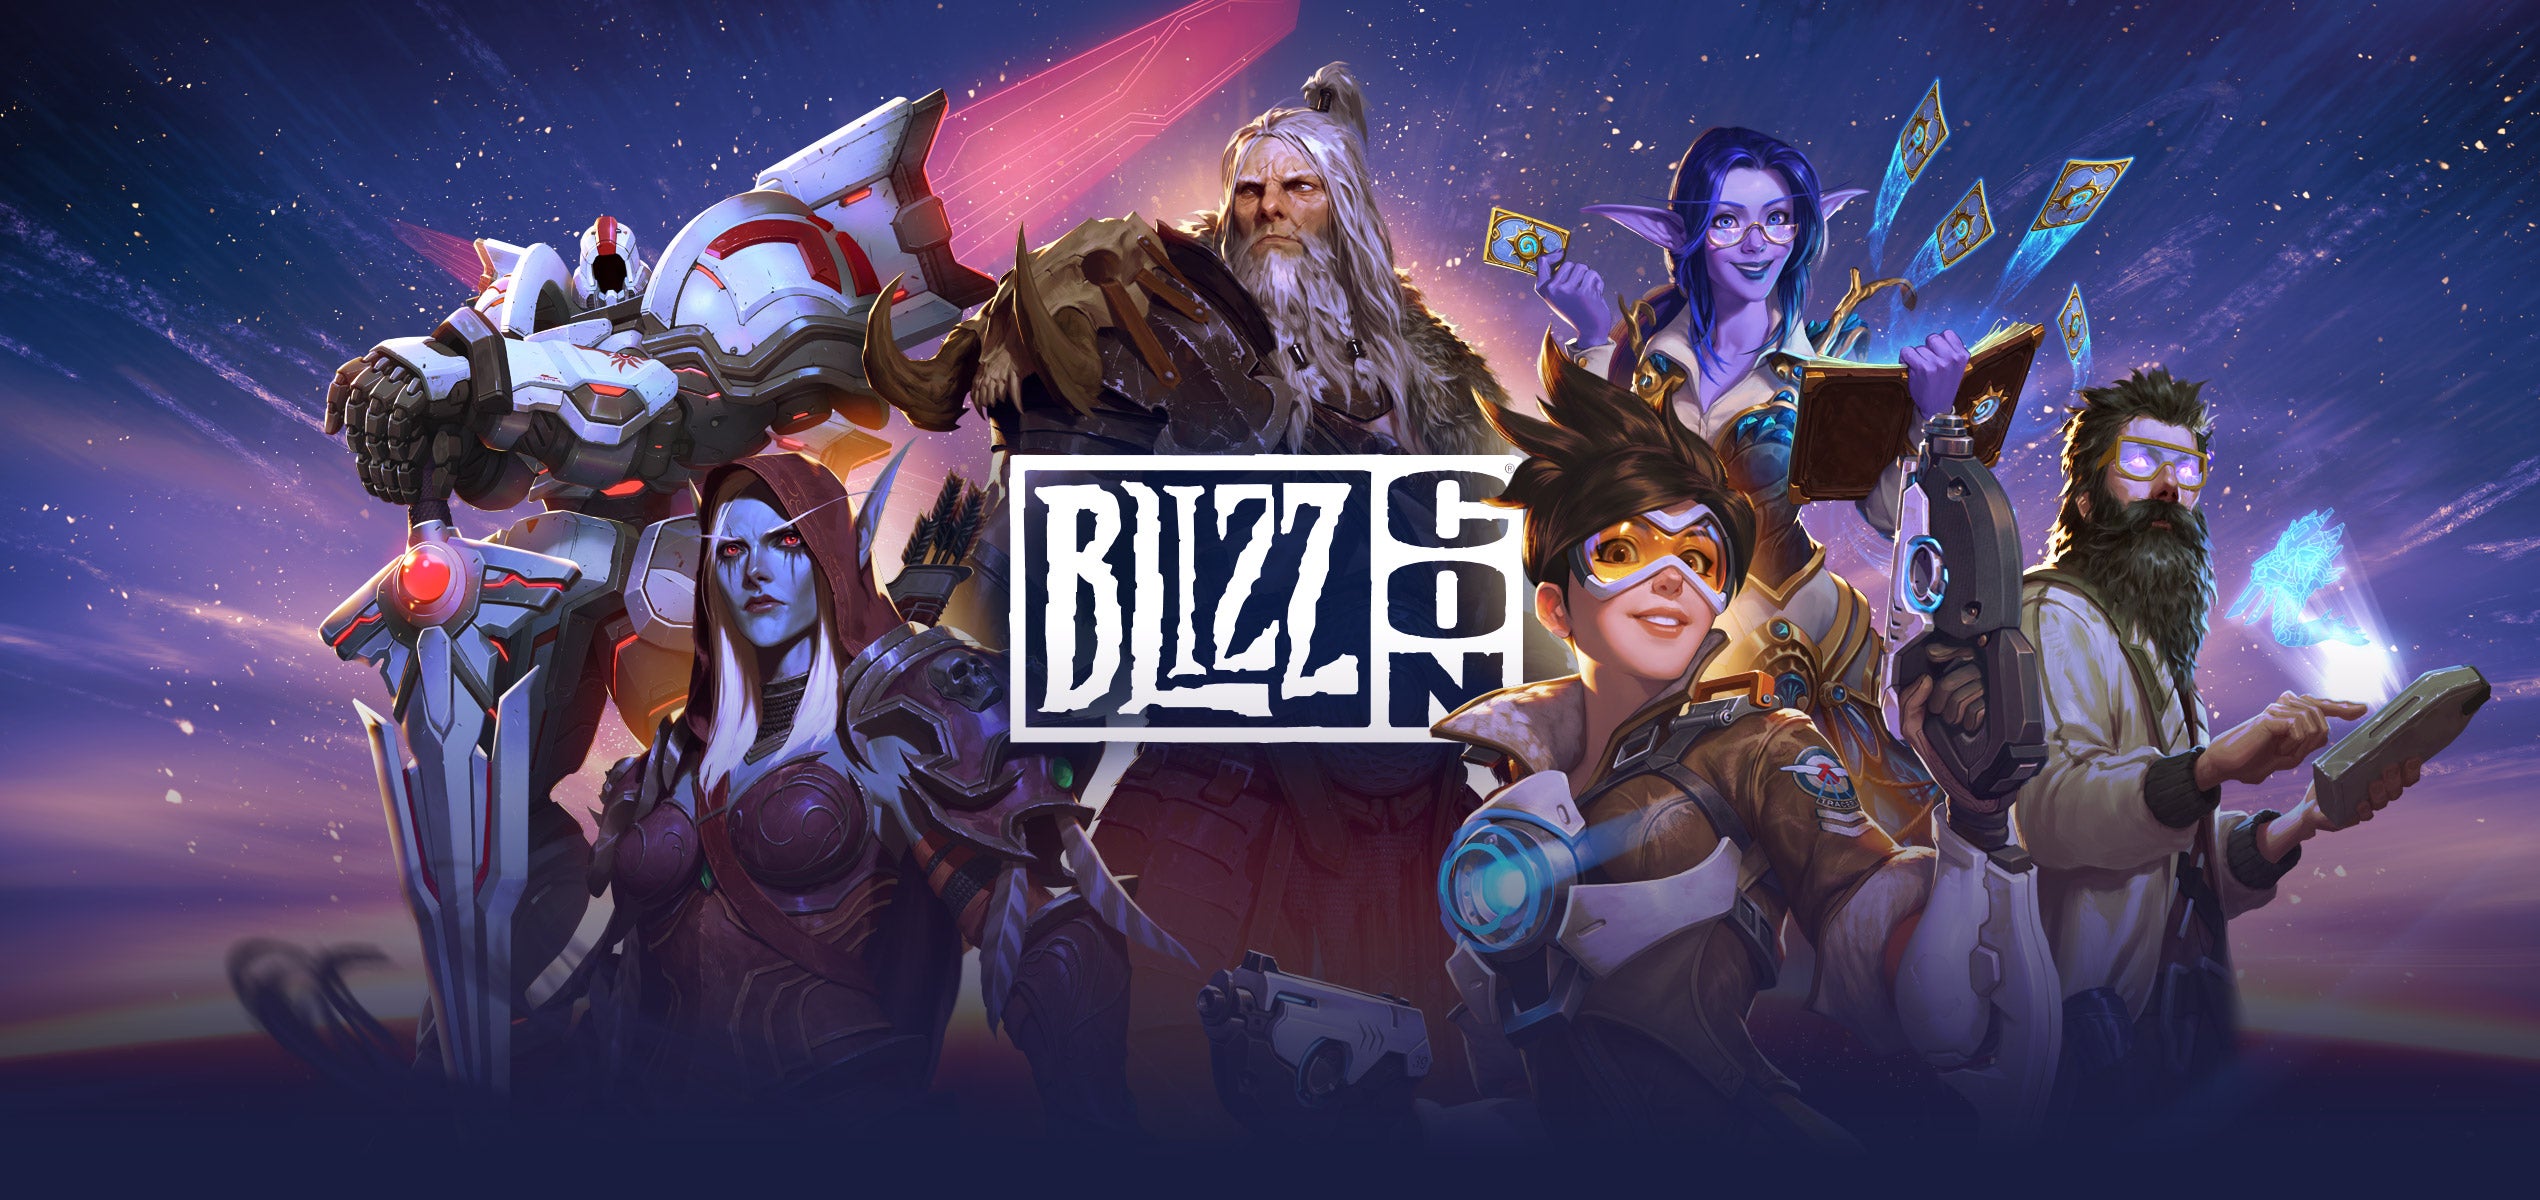 Image for BlizzCon 2019 kicked off today, re-watch the opening ceremony here